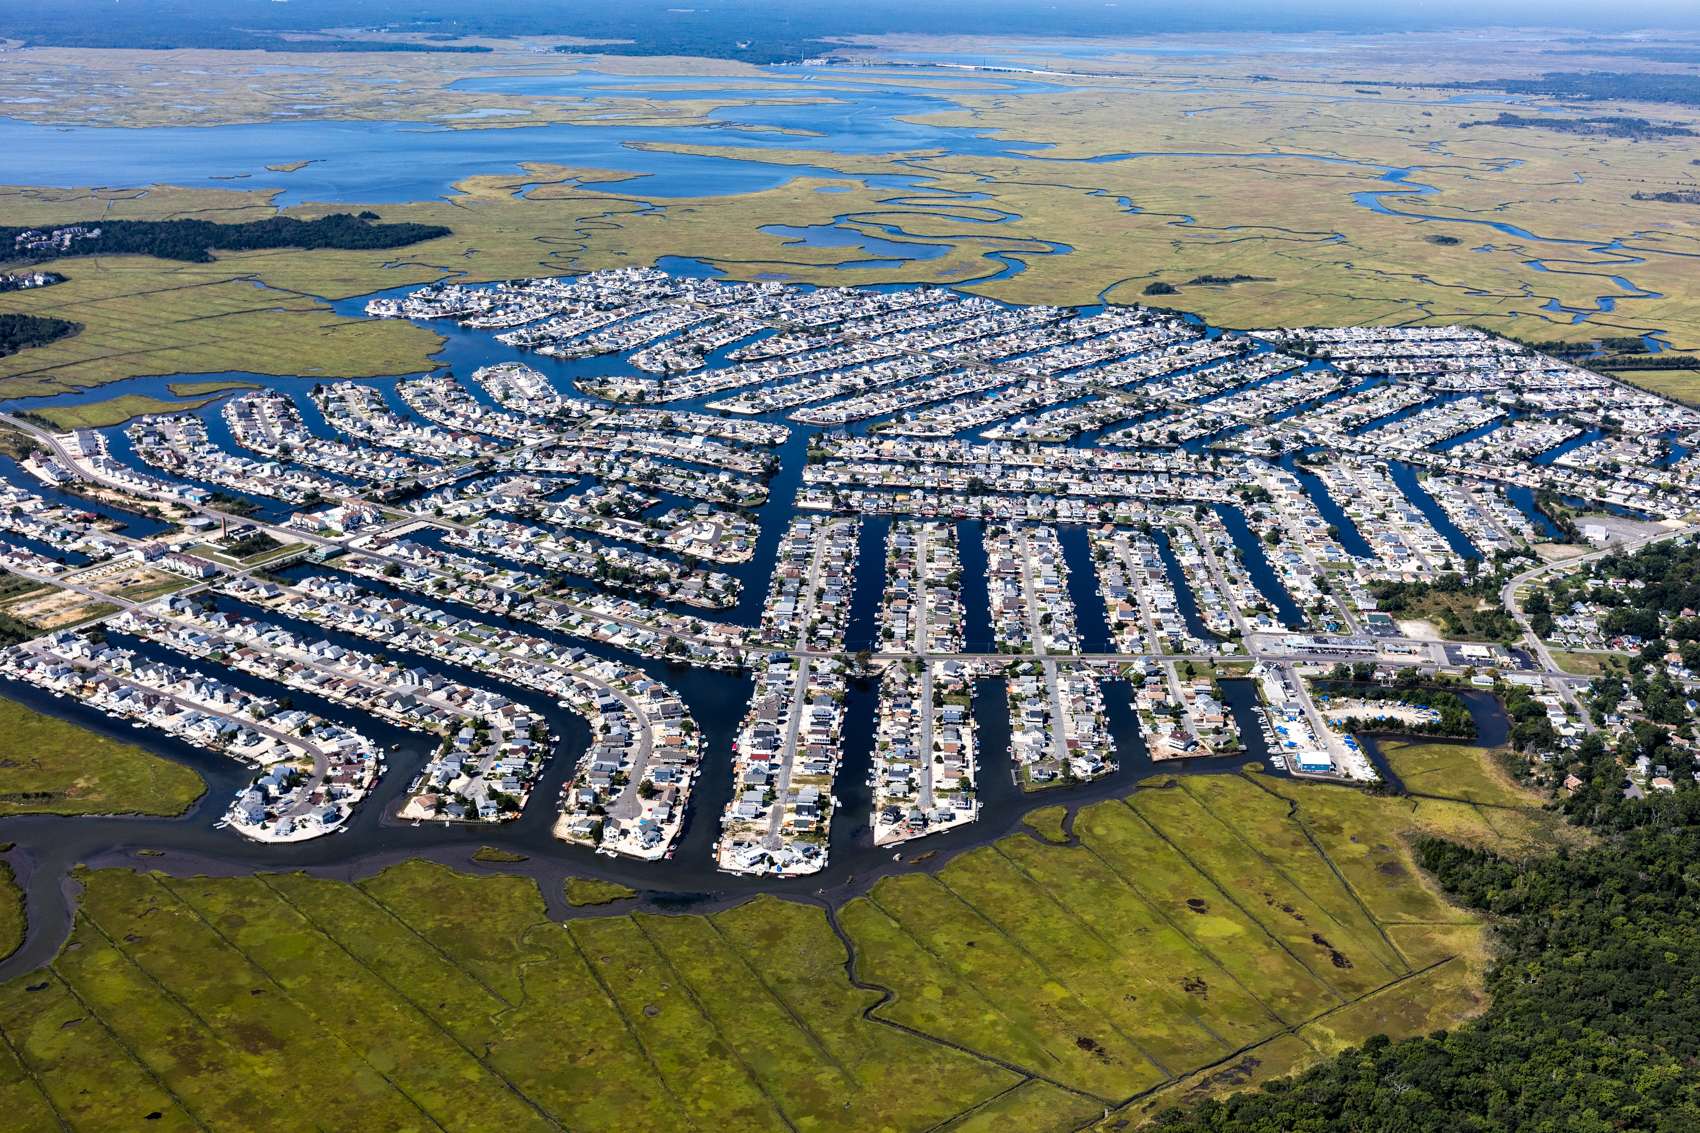 The Mystic Island neighborhood of Little Egg township, New Jersey is built on filled in wetlands. Today, it suffers from drops in home prices partially due to flood risk, an easy thought to have after Hurricane Sandy smashed through New Jersey in 2012.